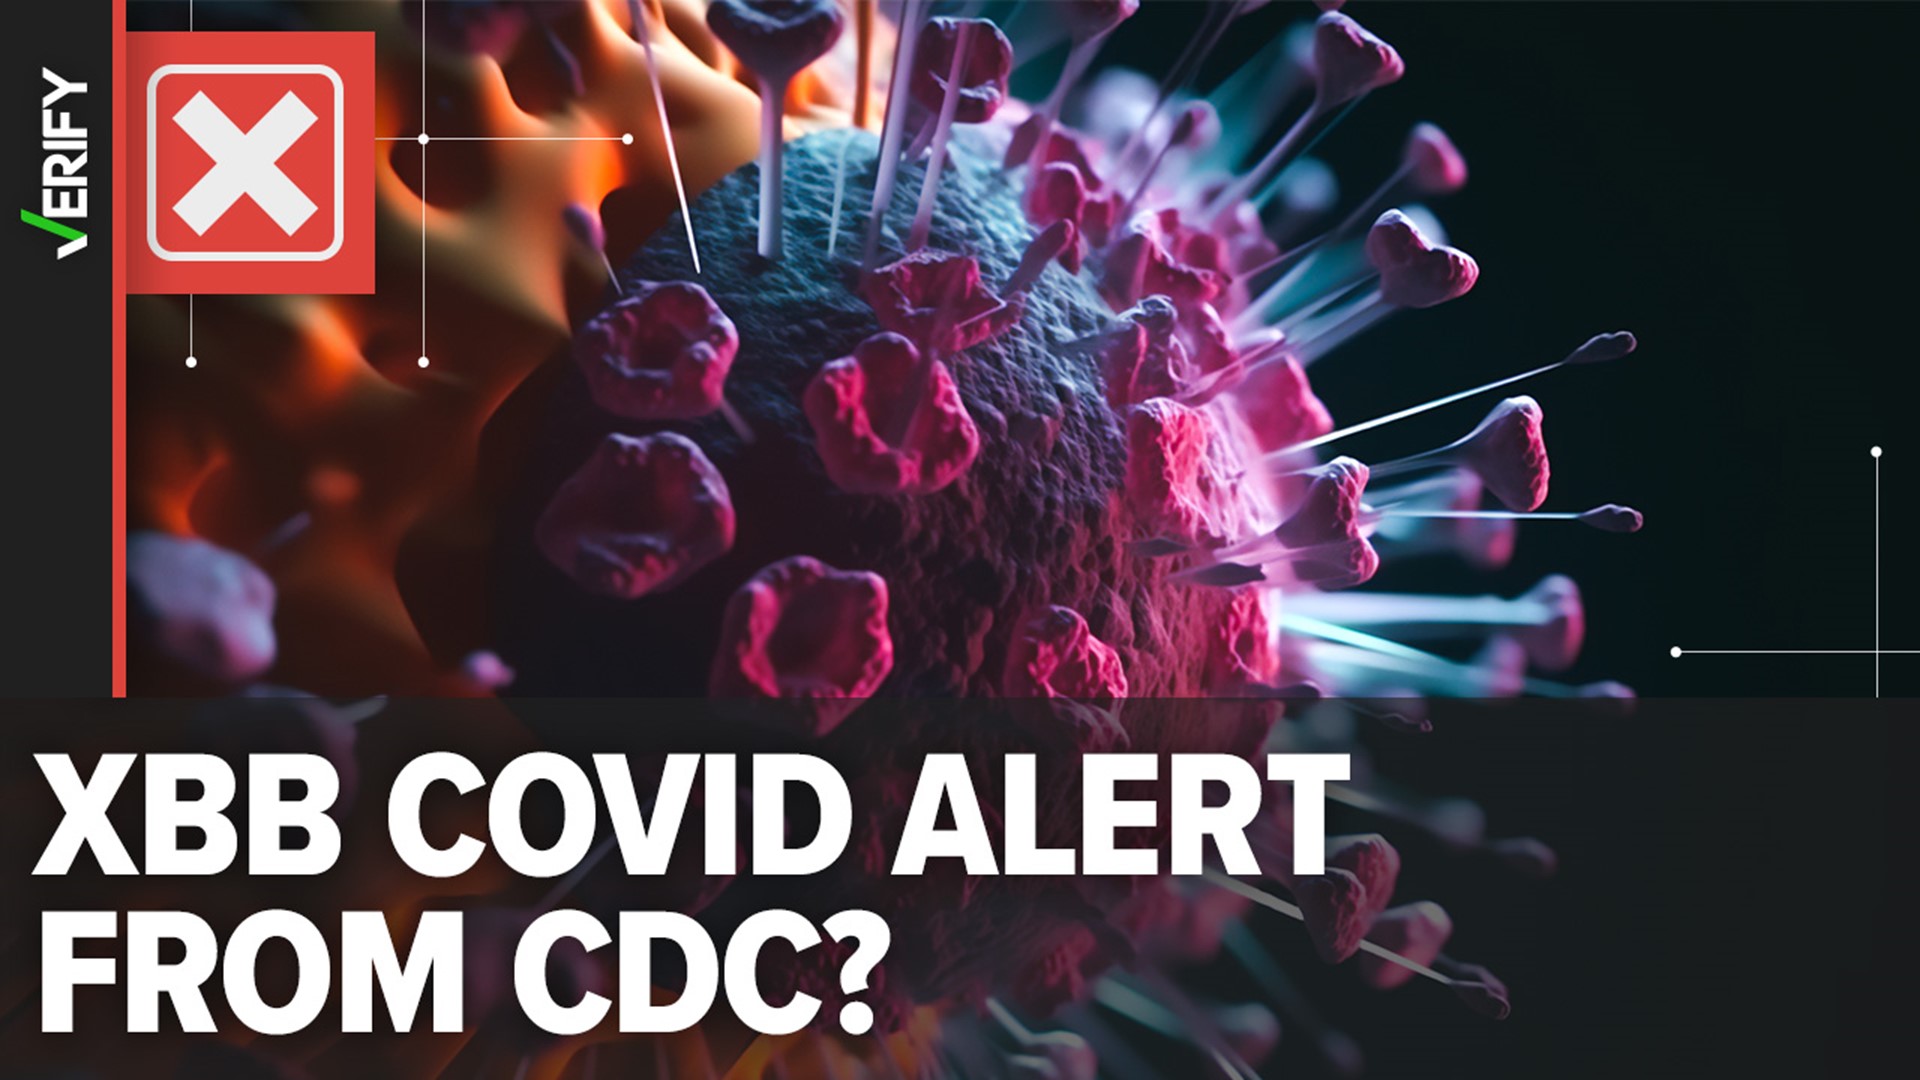 Several VERIFY readers asked us to look into Facebook posts claiming to show a CDC advisory about the XBB subvariant of COVID-19. Here’s what we found.